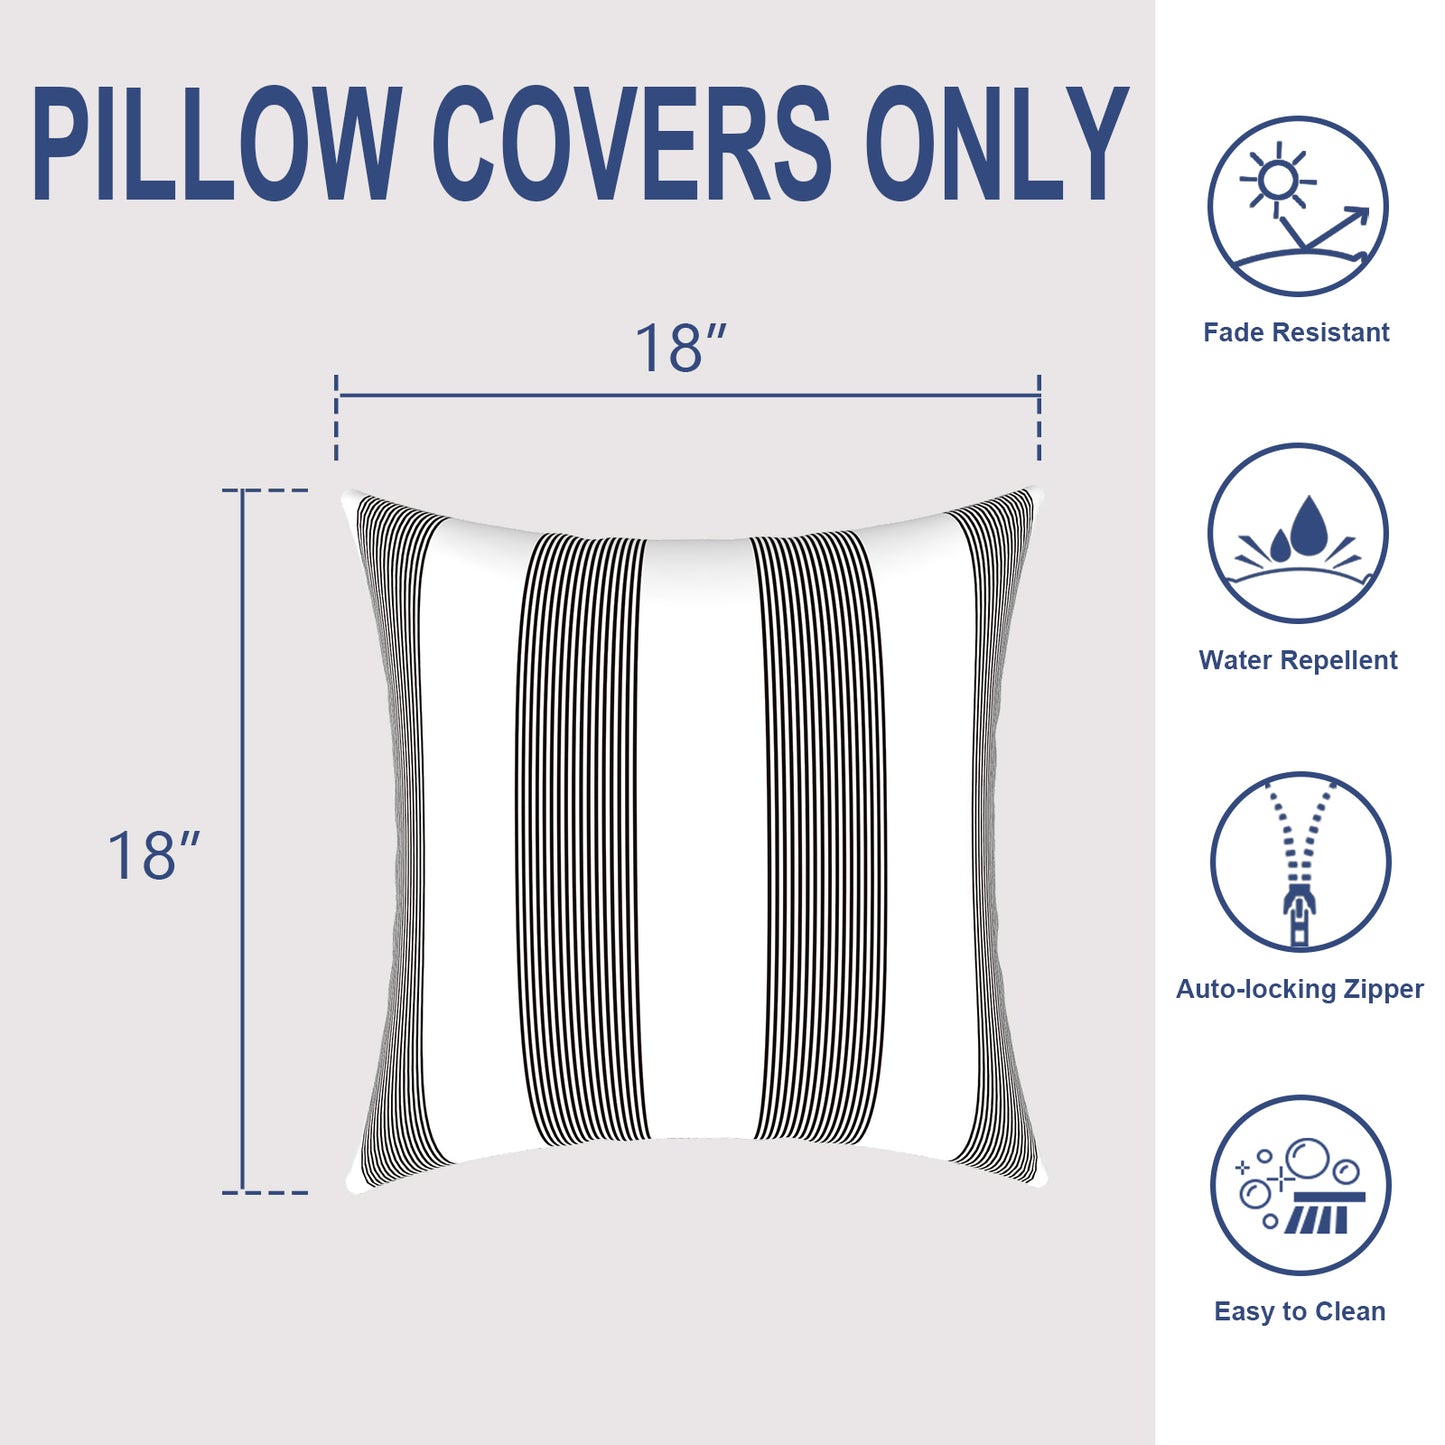 Melody Elephant Outdoor Throw Pillow Covers Pack of 2, Decorative Water Repellent Square Pillow Cases 18x18 Inch, Patio Pillowcases for Home Patio Furniture Use, Stripe Cabana Black